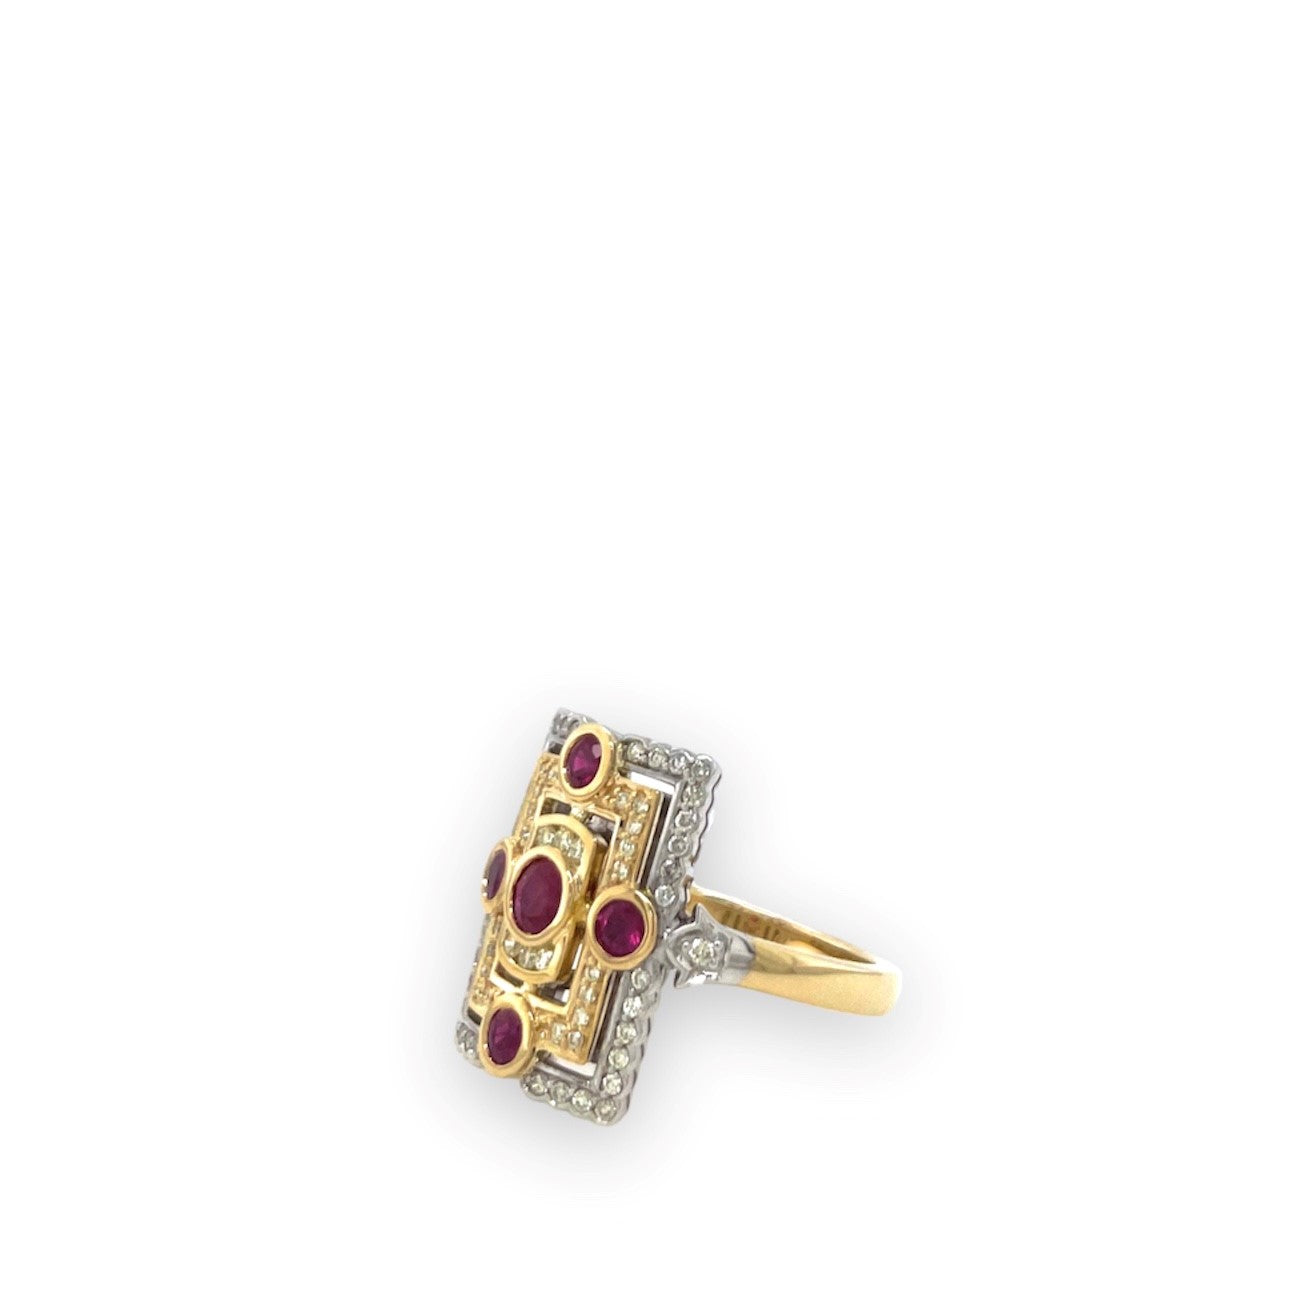 Vintage Inspired Ruby and Diamond Ring